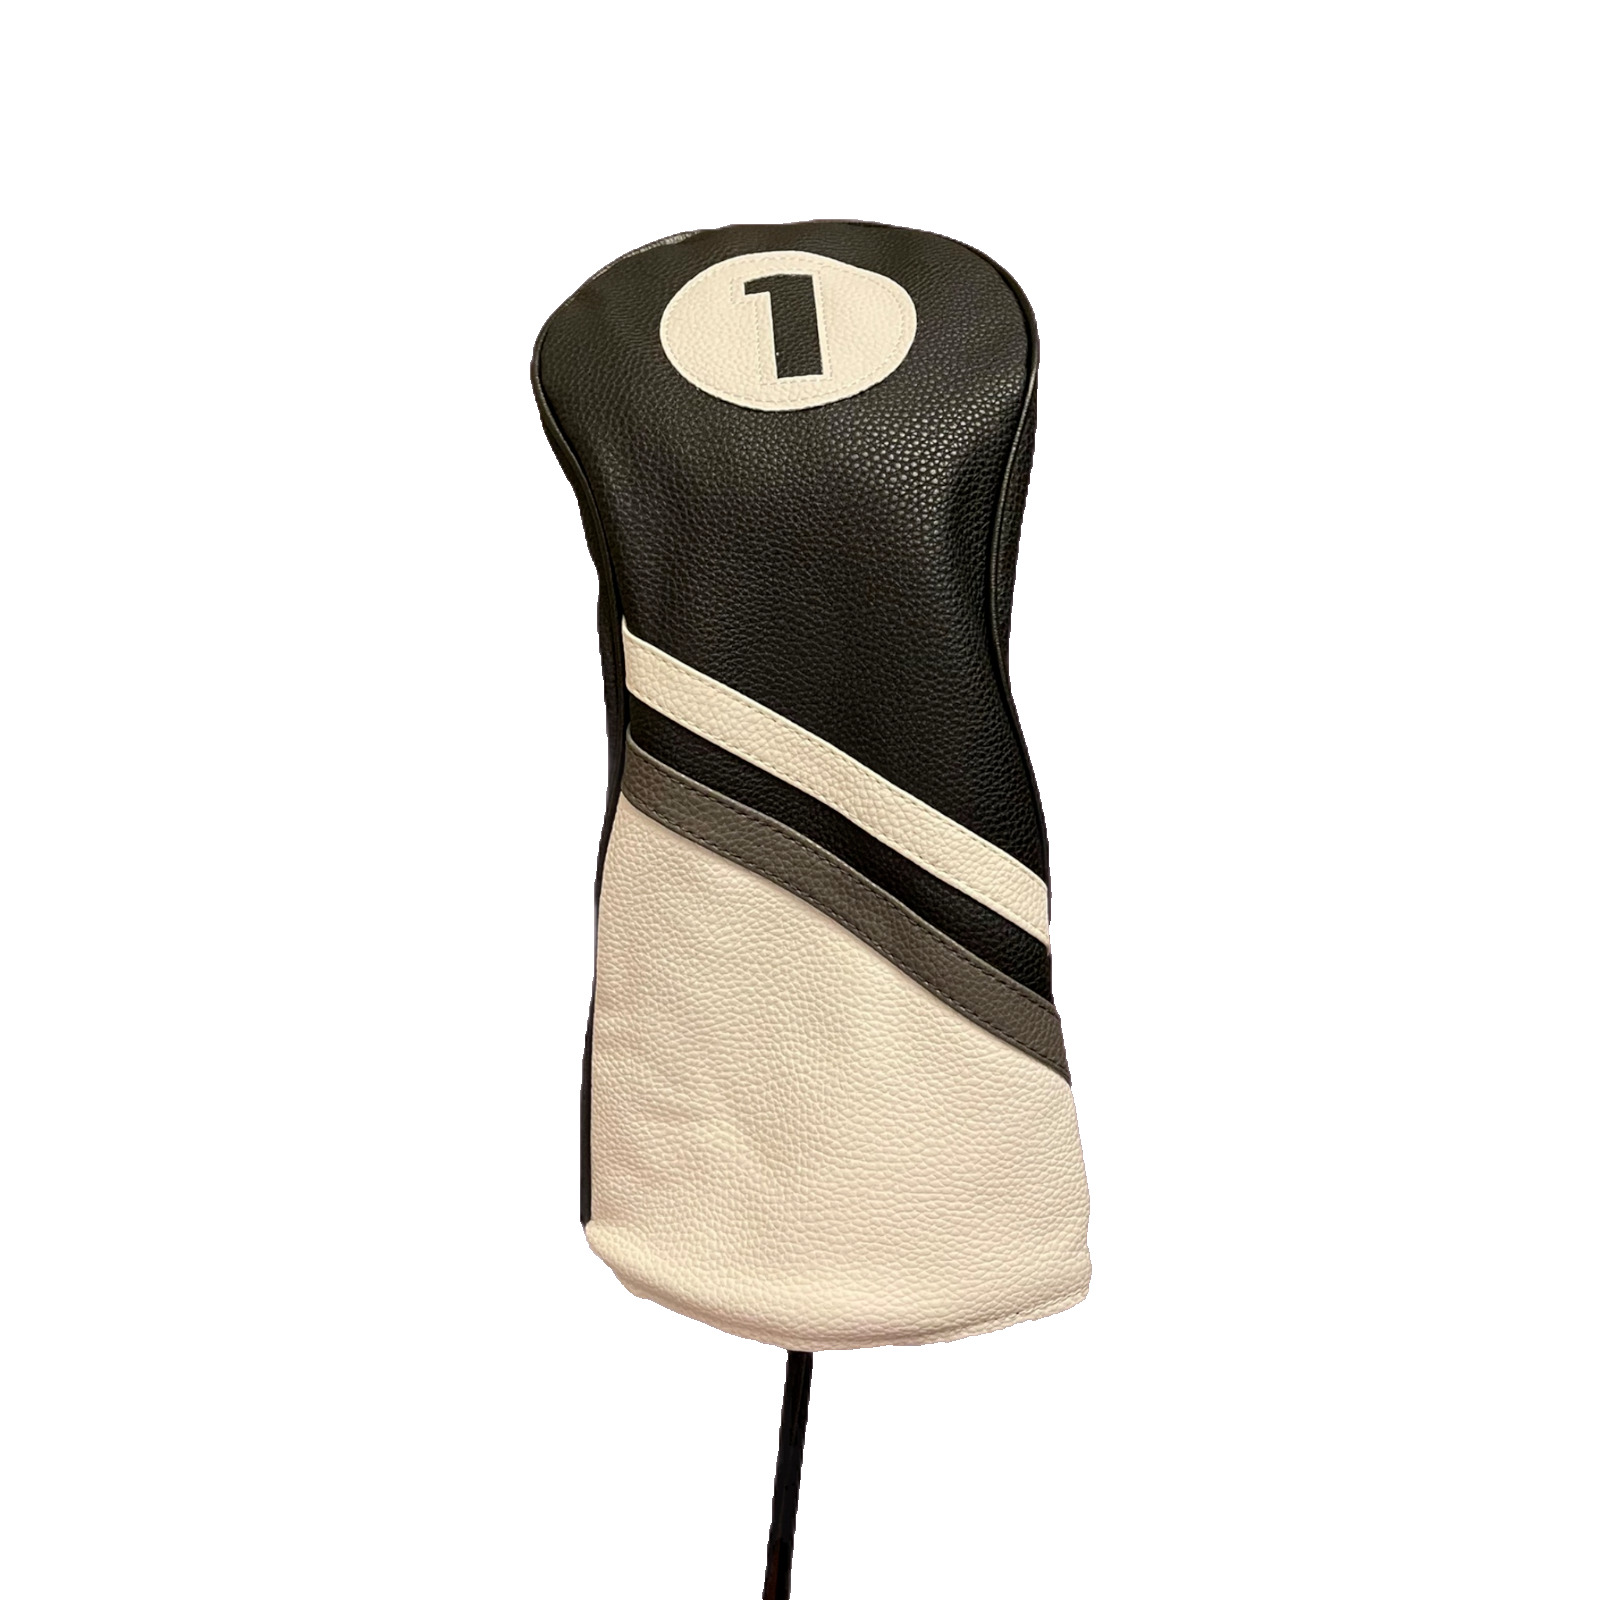 Grey and Black Driver Golf Headcover. Fits All Driver Sizes